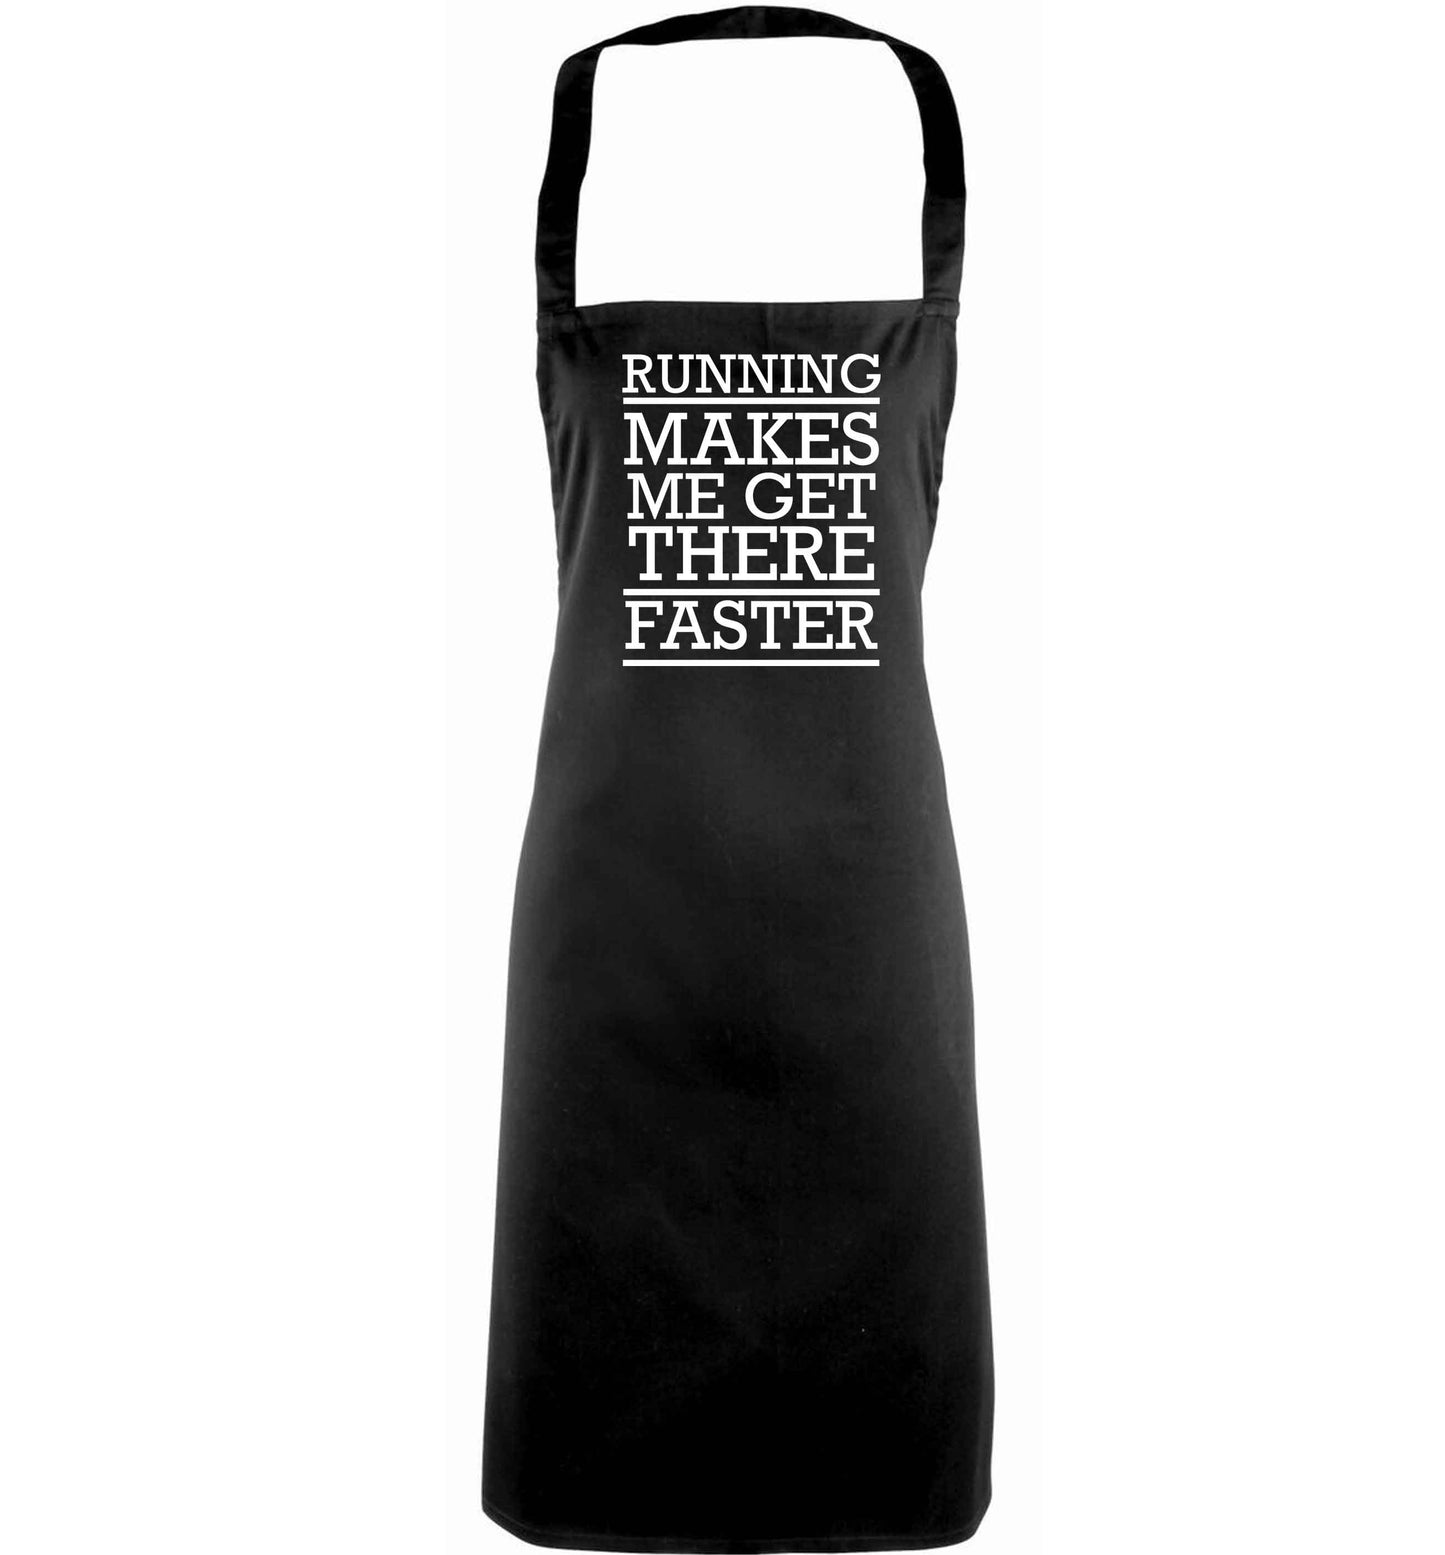 Running makes me get there faster adults black apron